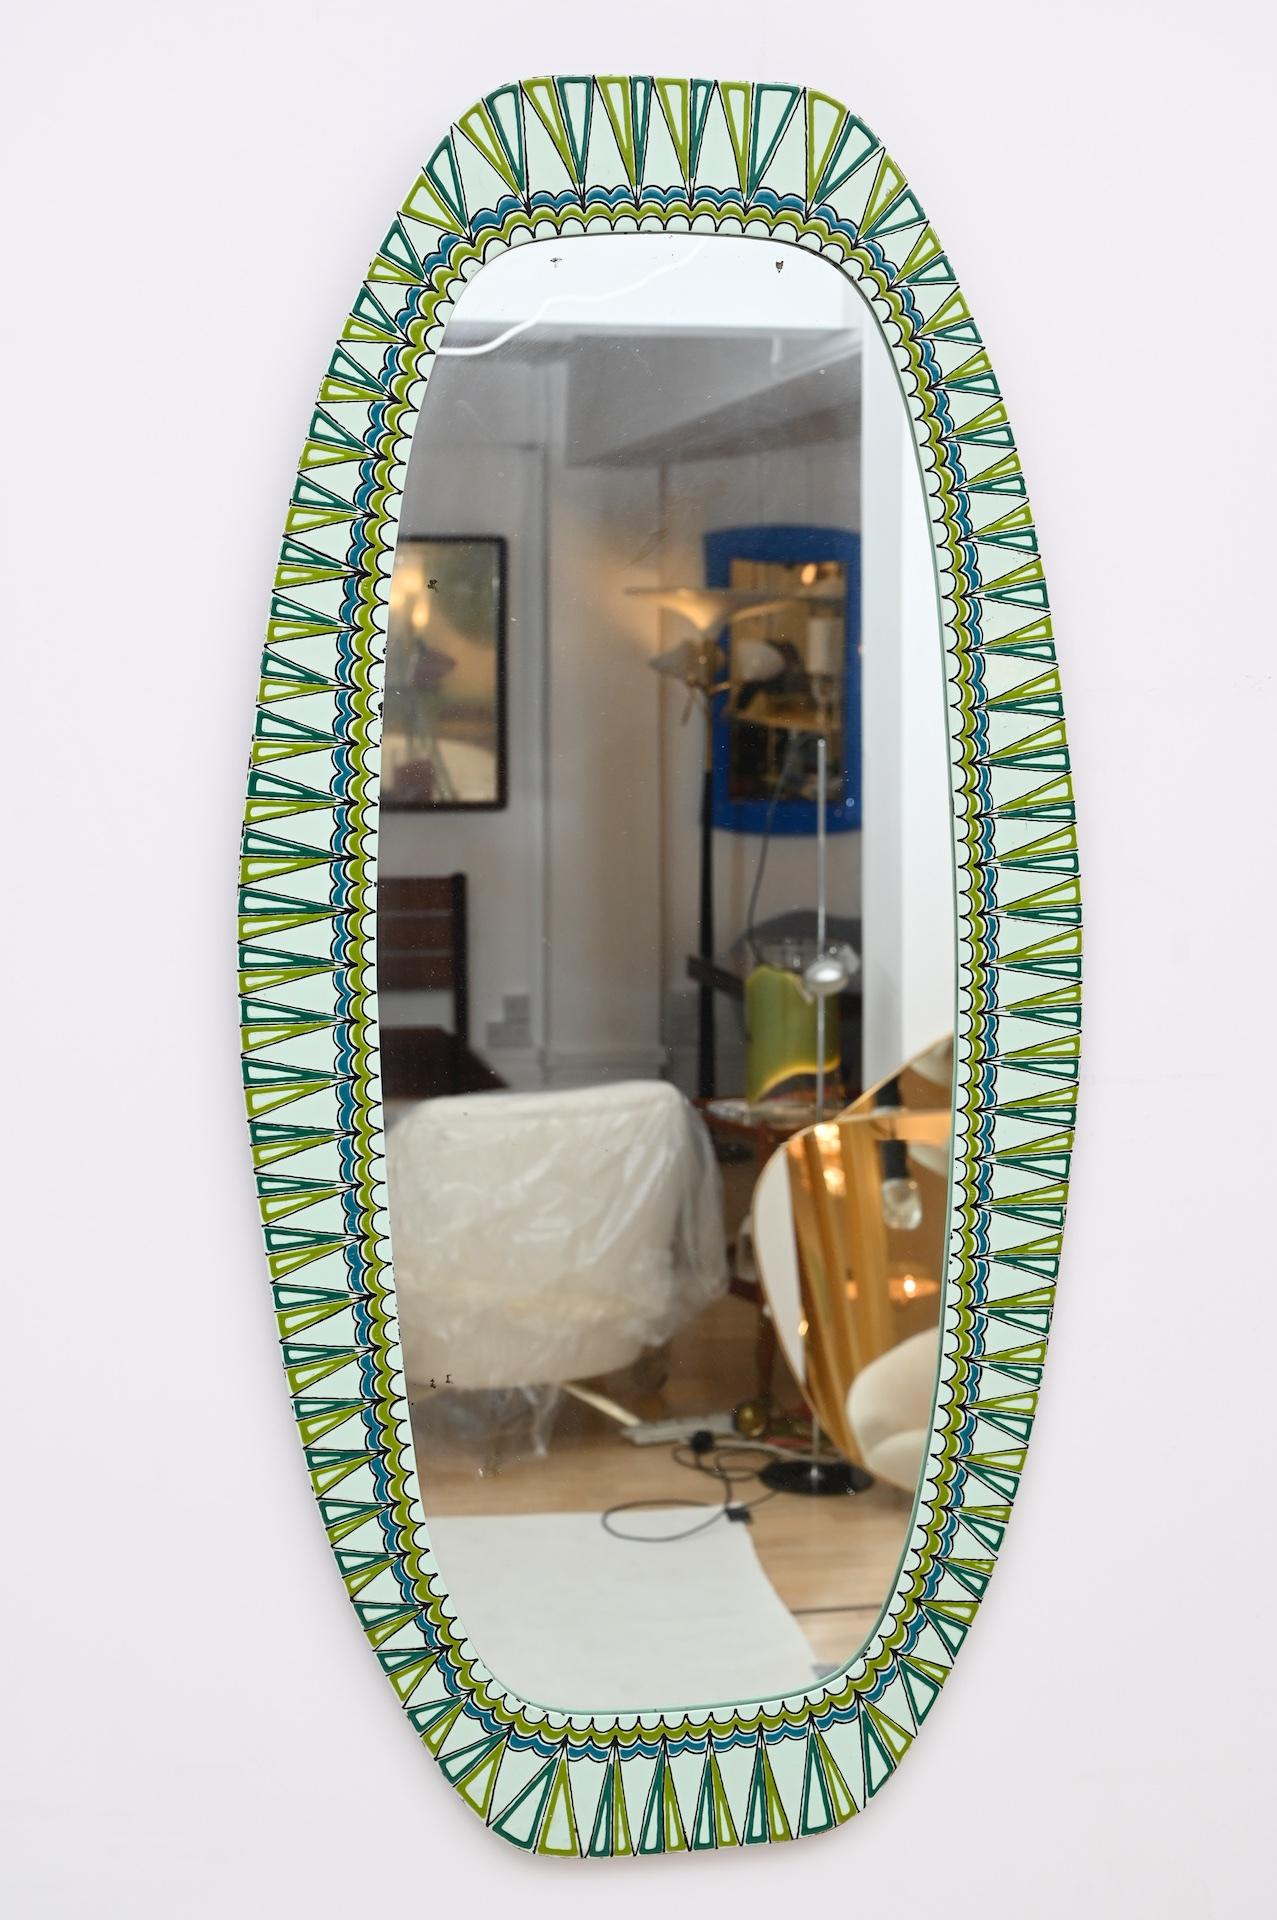 Decorative enameled mirror in shades of green, blue and black.